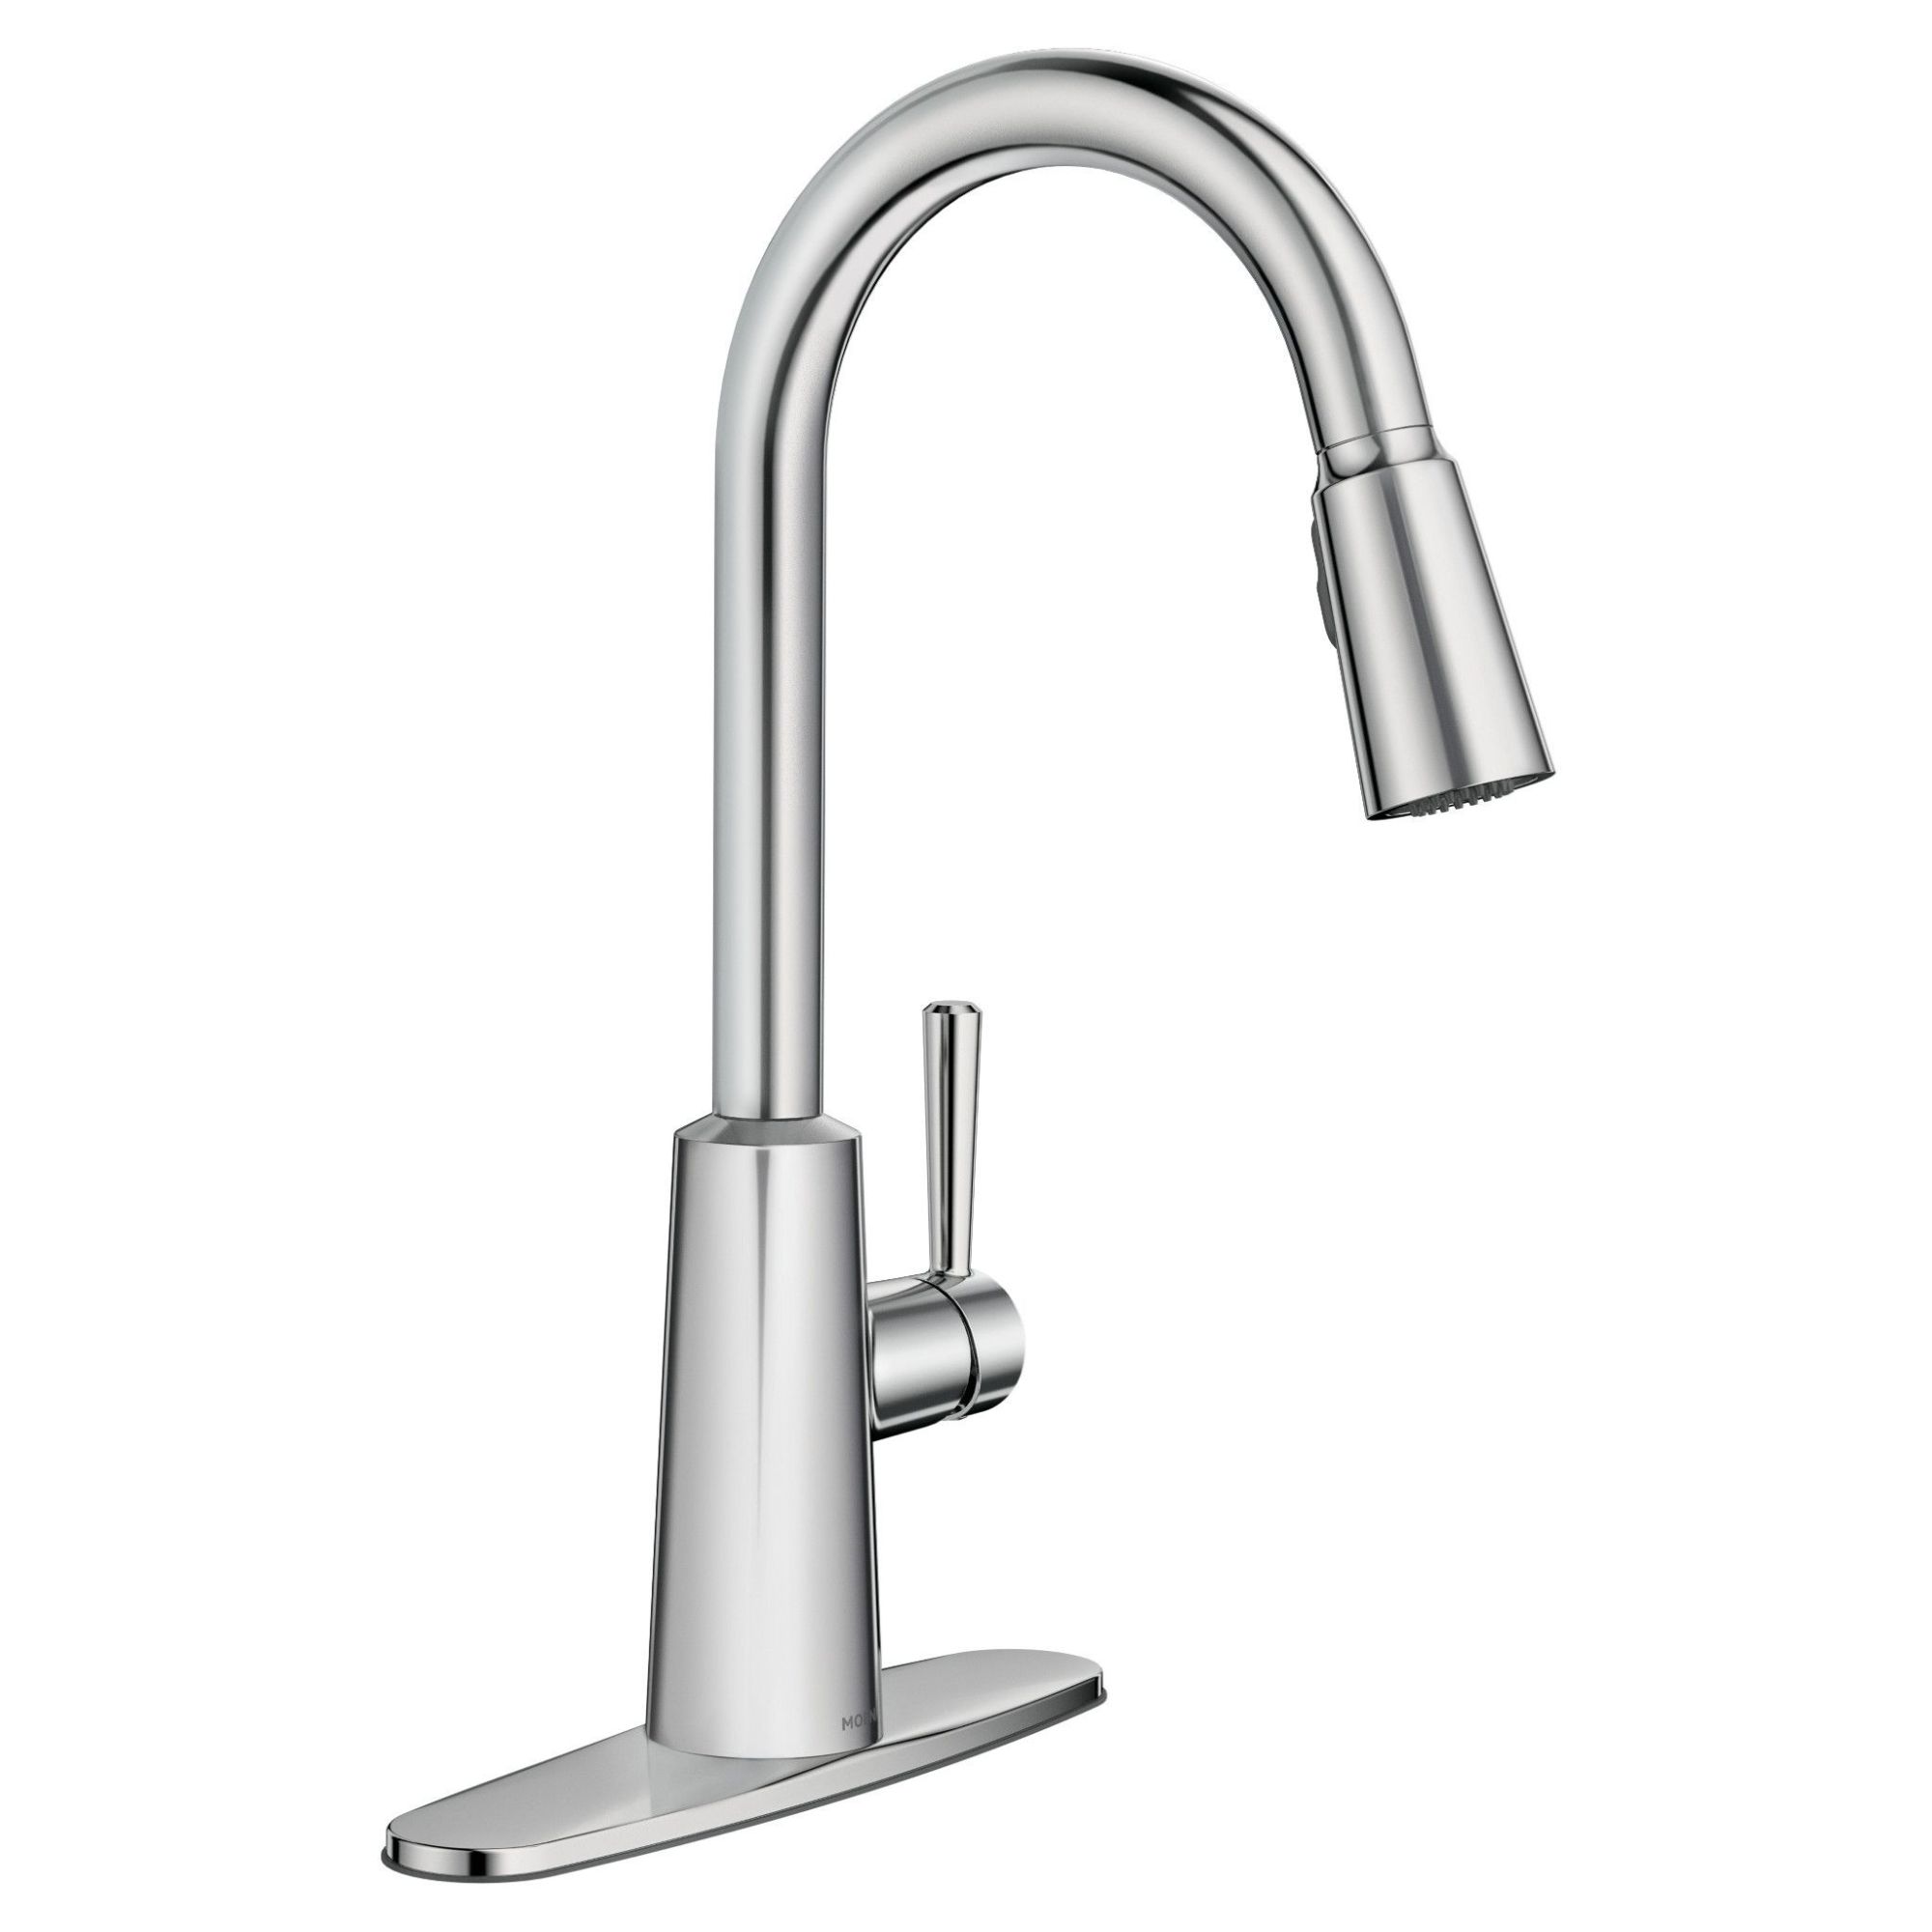 Moen Riley Chrome Single Handle Pull-down Kitchen Faucet with Sprayer ...